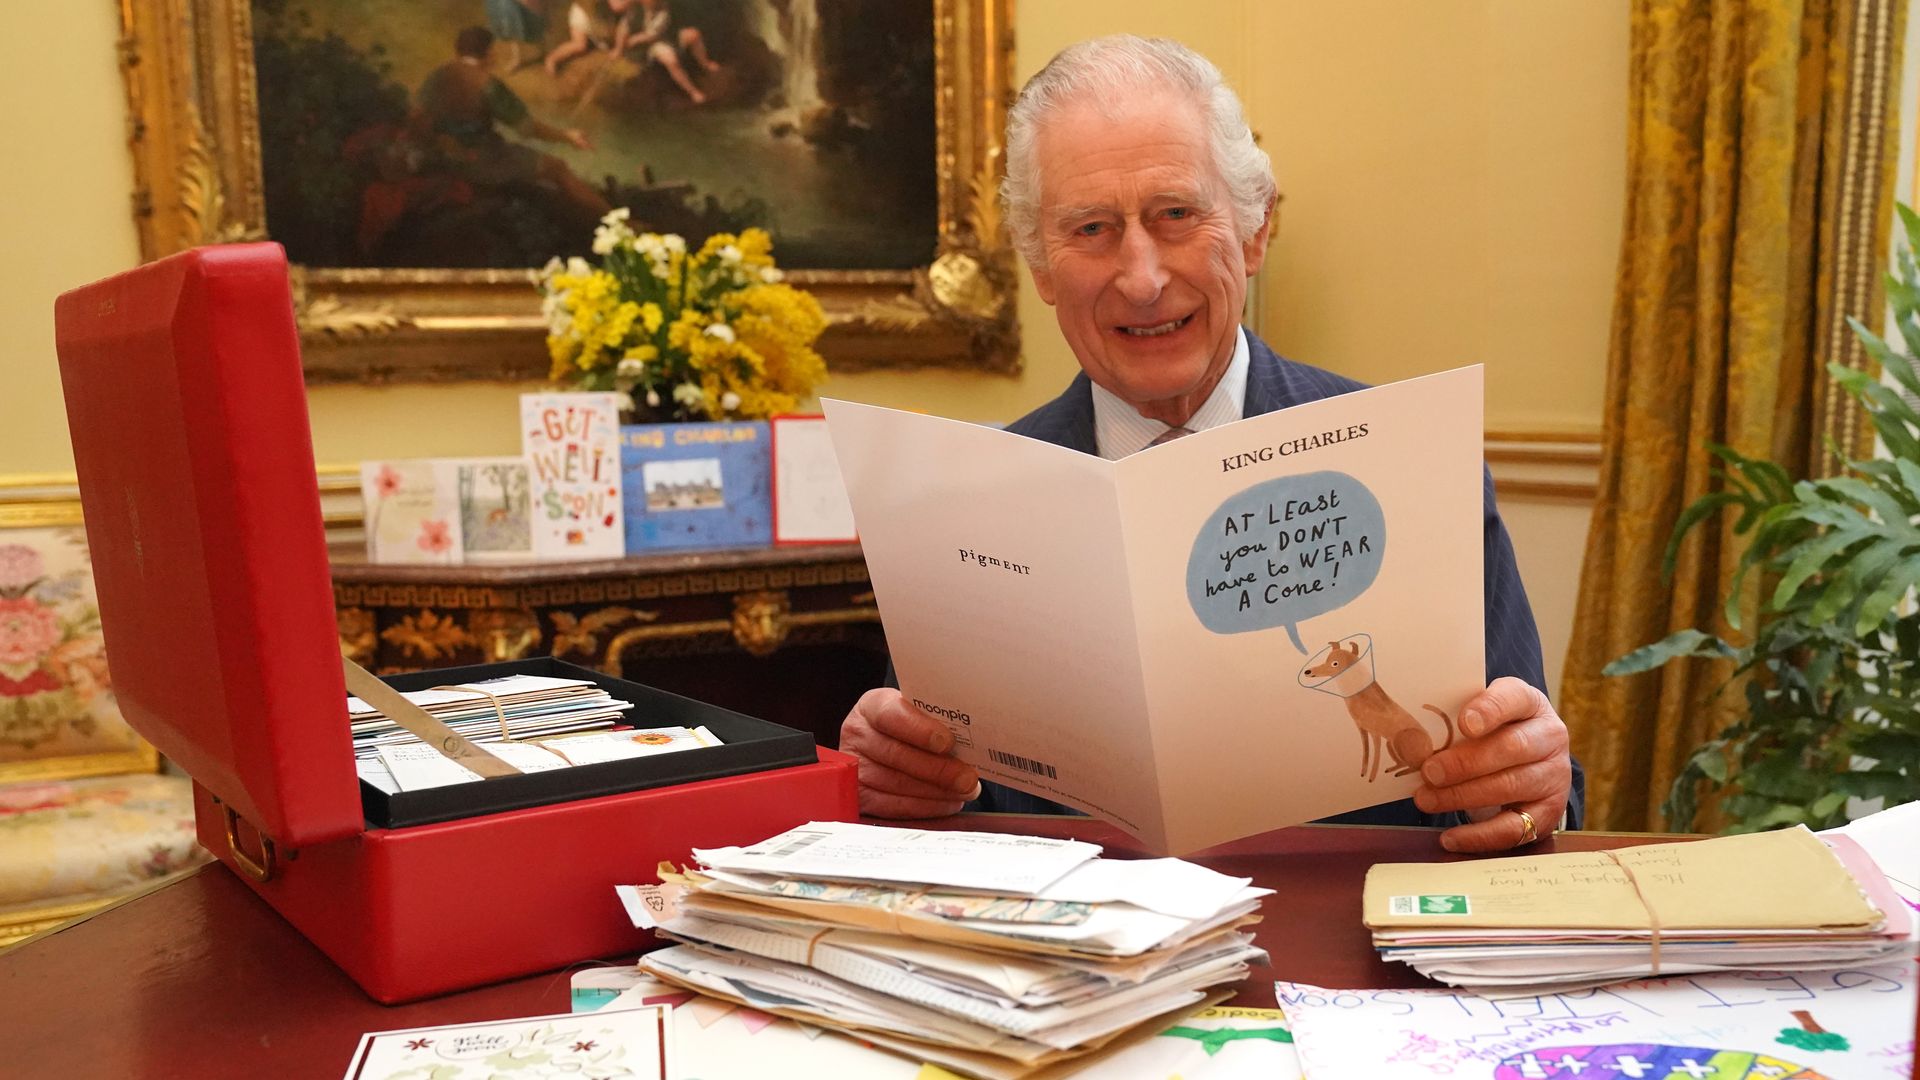 King Charles looks visibly touched as he's inundated with get well cards from the public